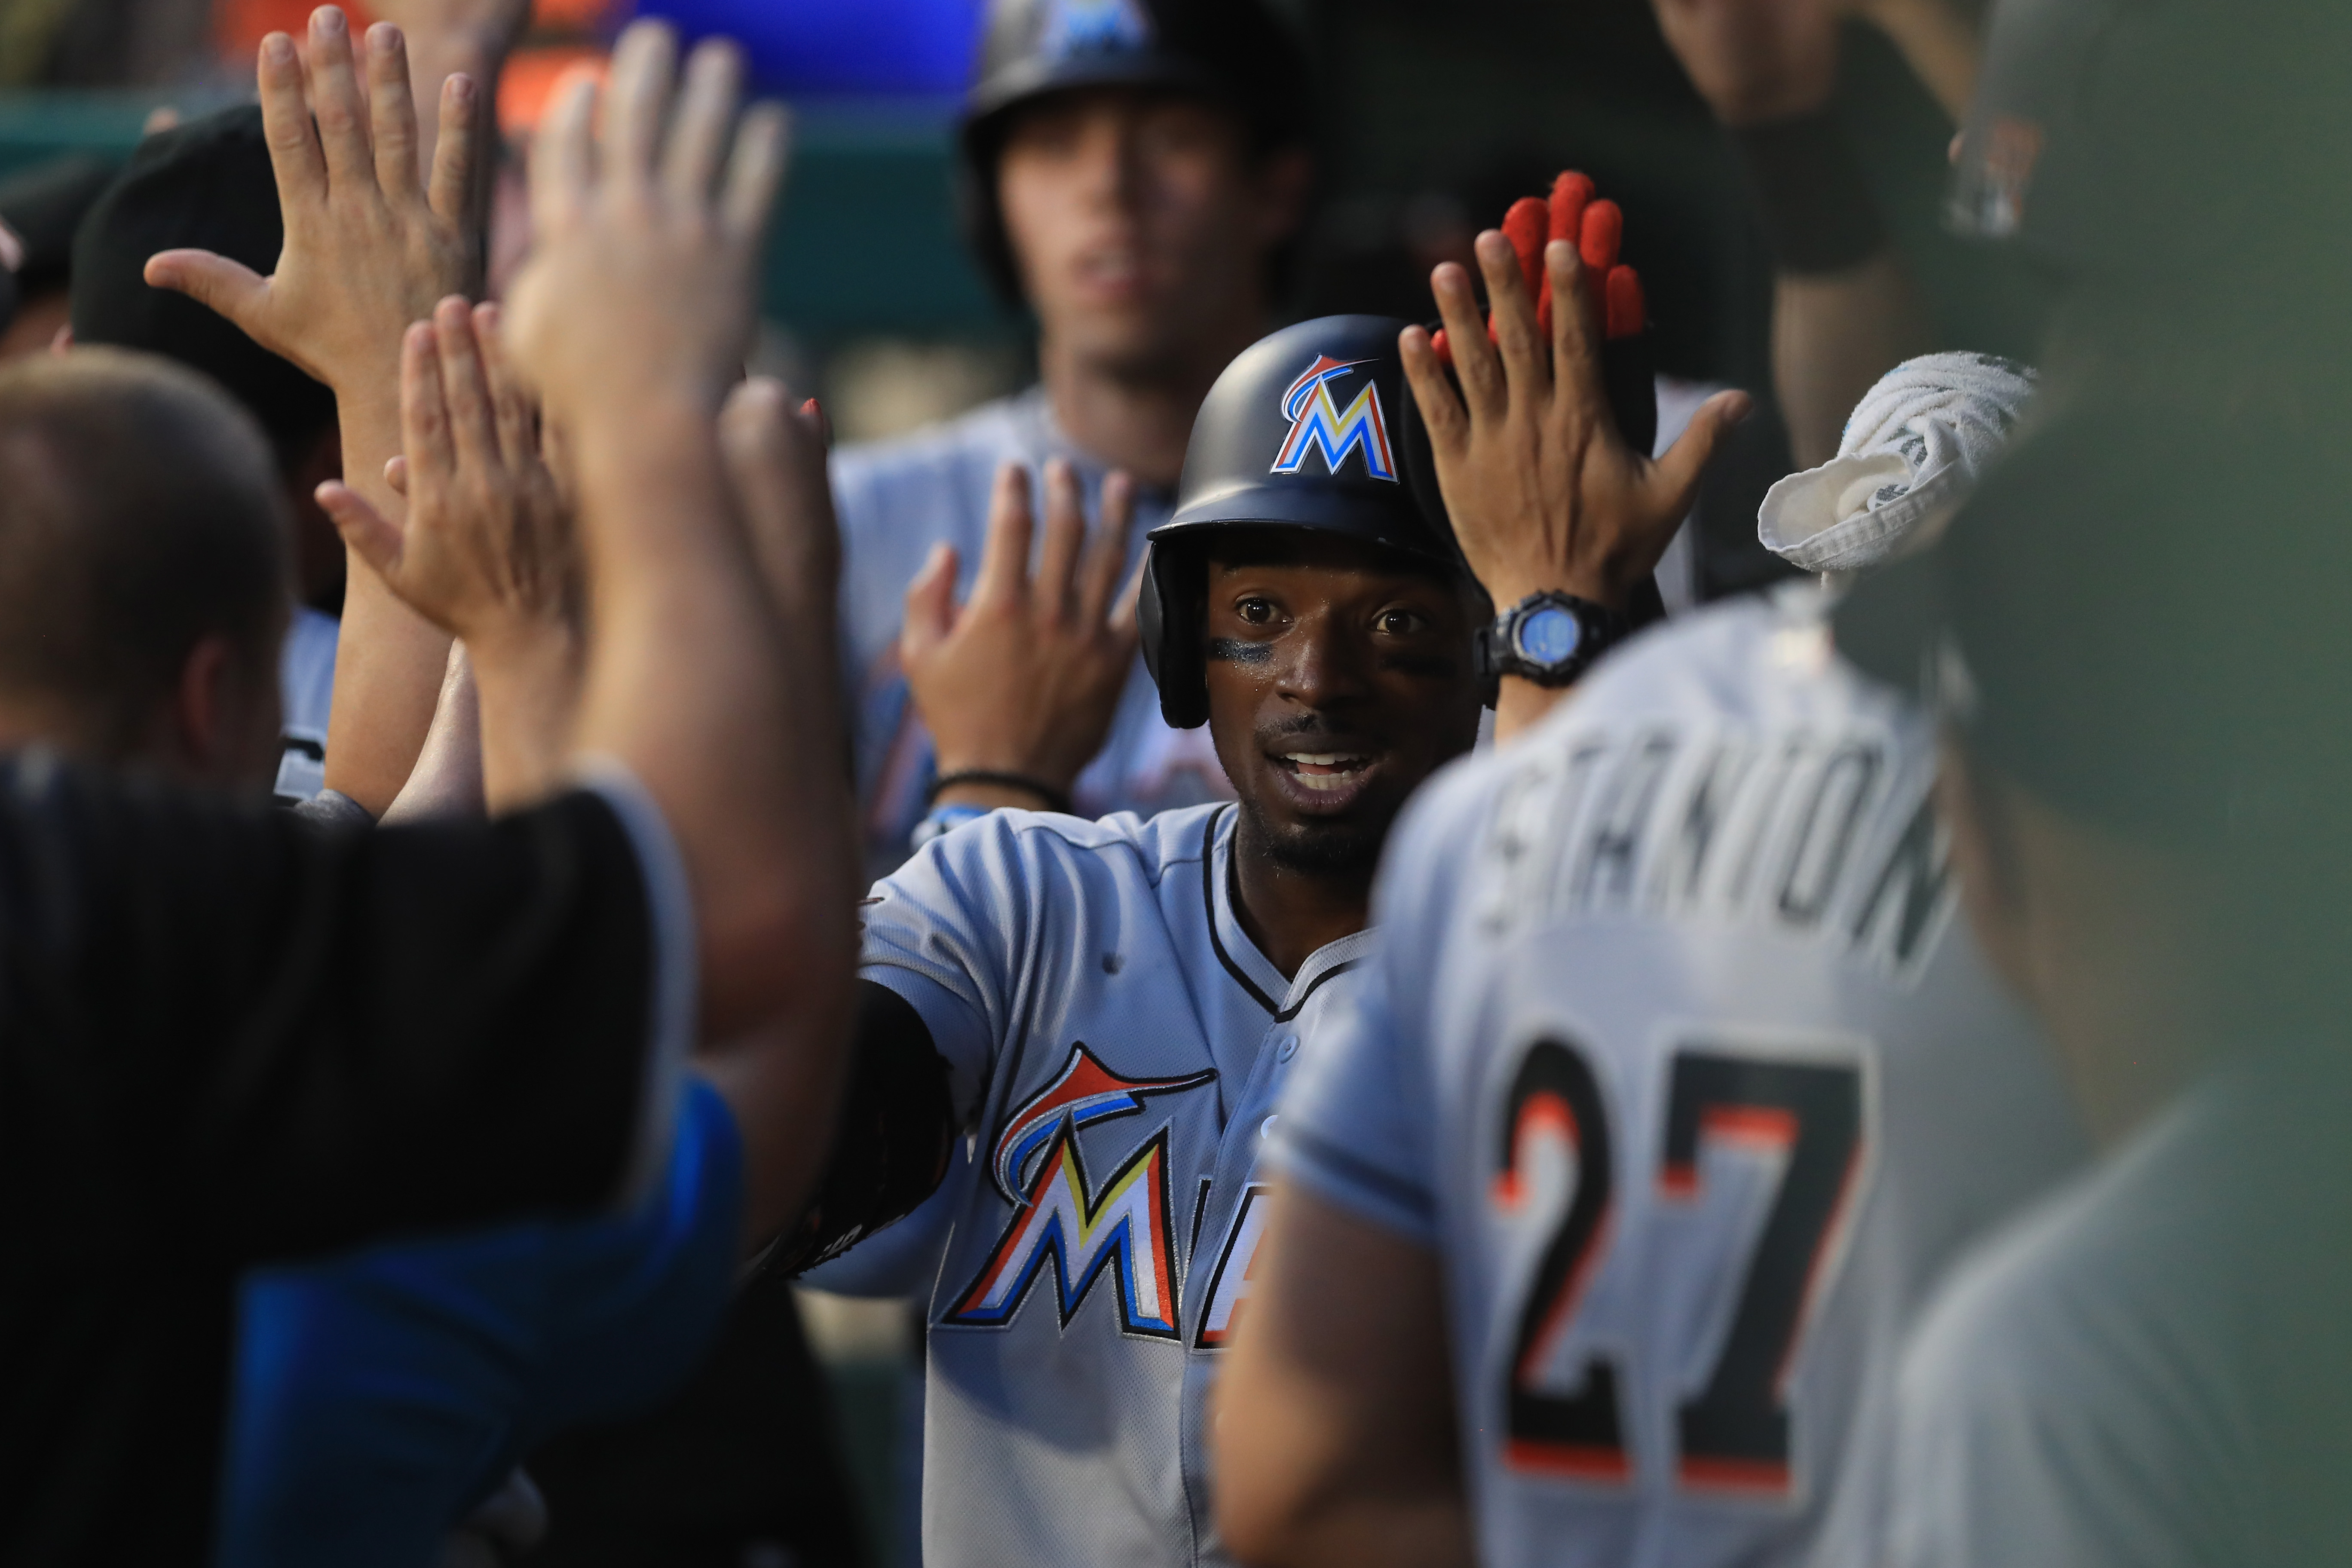 Dee Gordon #9 of the Miami Marlins celebrates after scoring in the fourth inning against the Texas Rangers at Globe Life Park in Arlington on July 26, 2017 in Arlington, Texas.